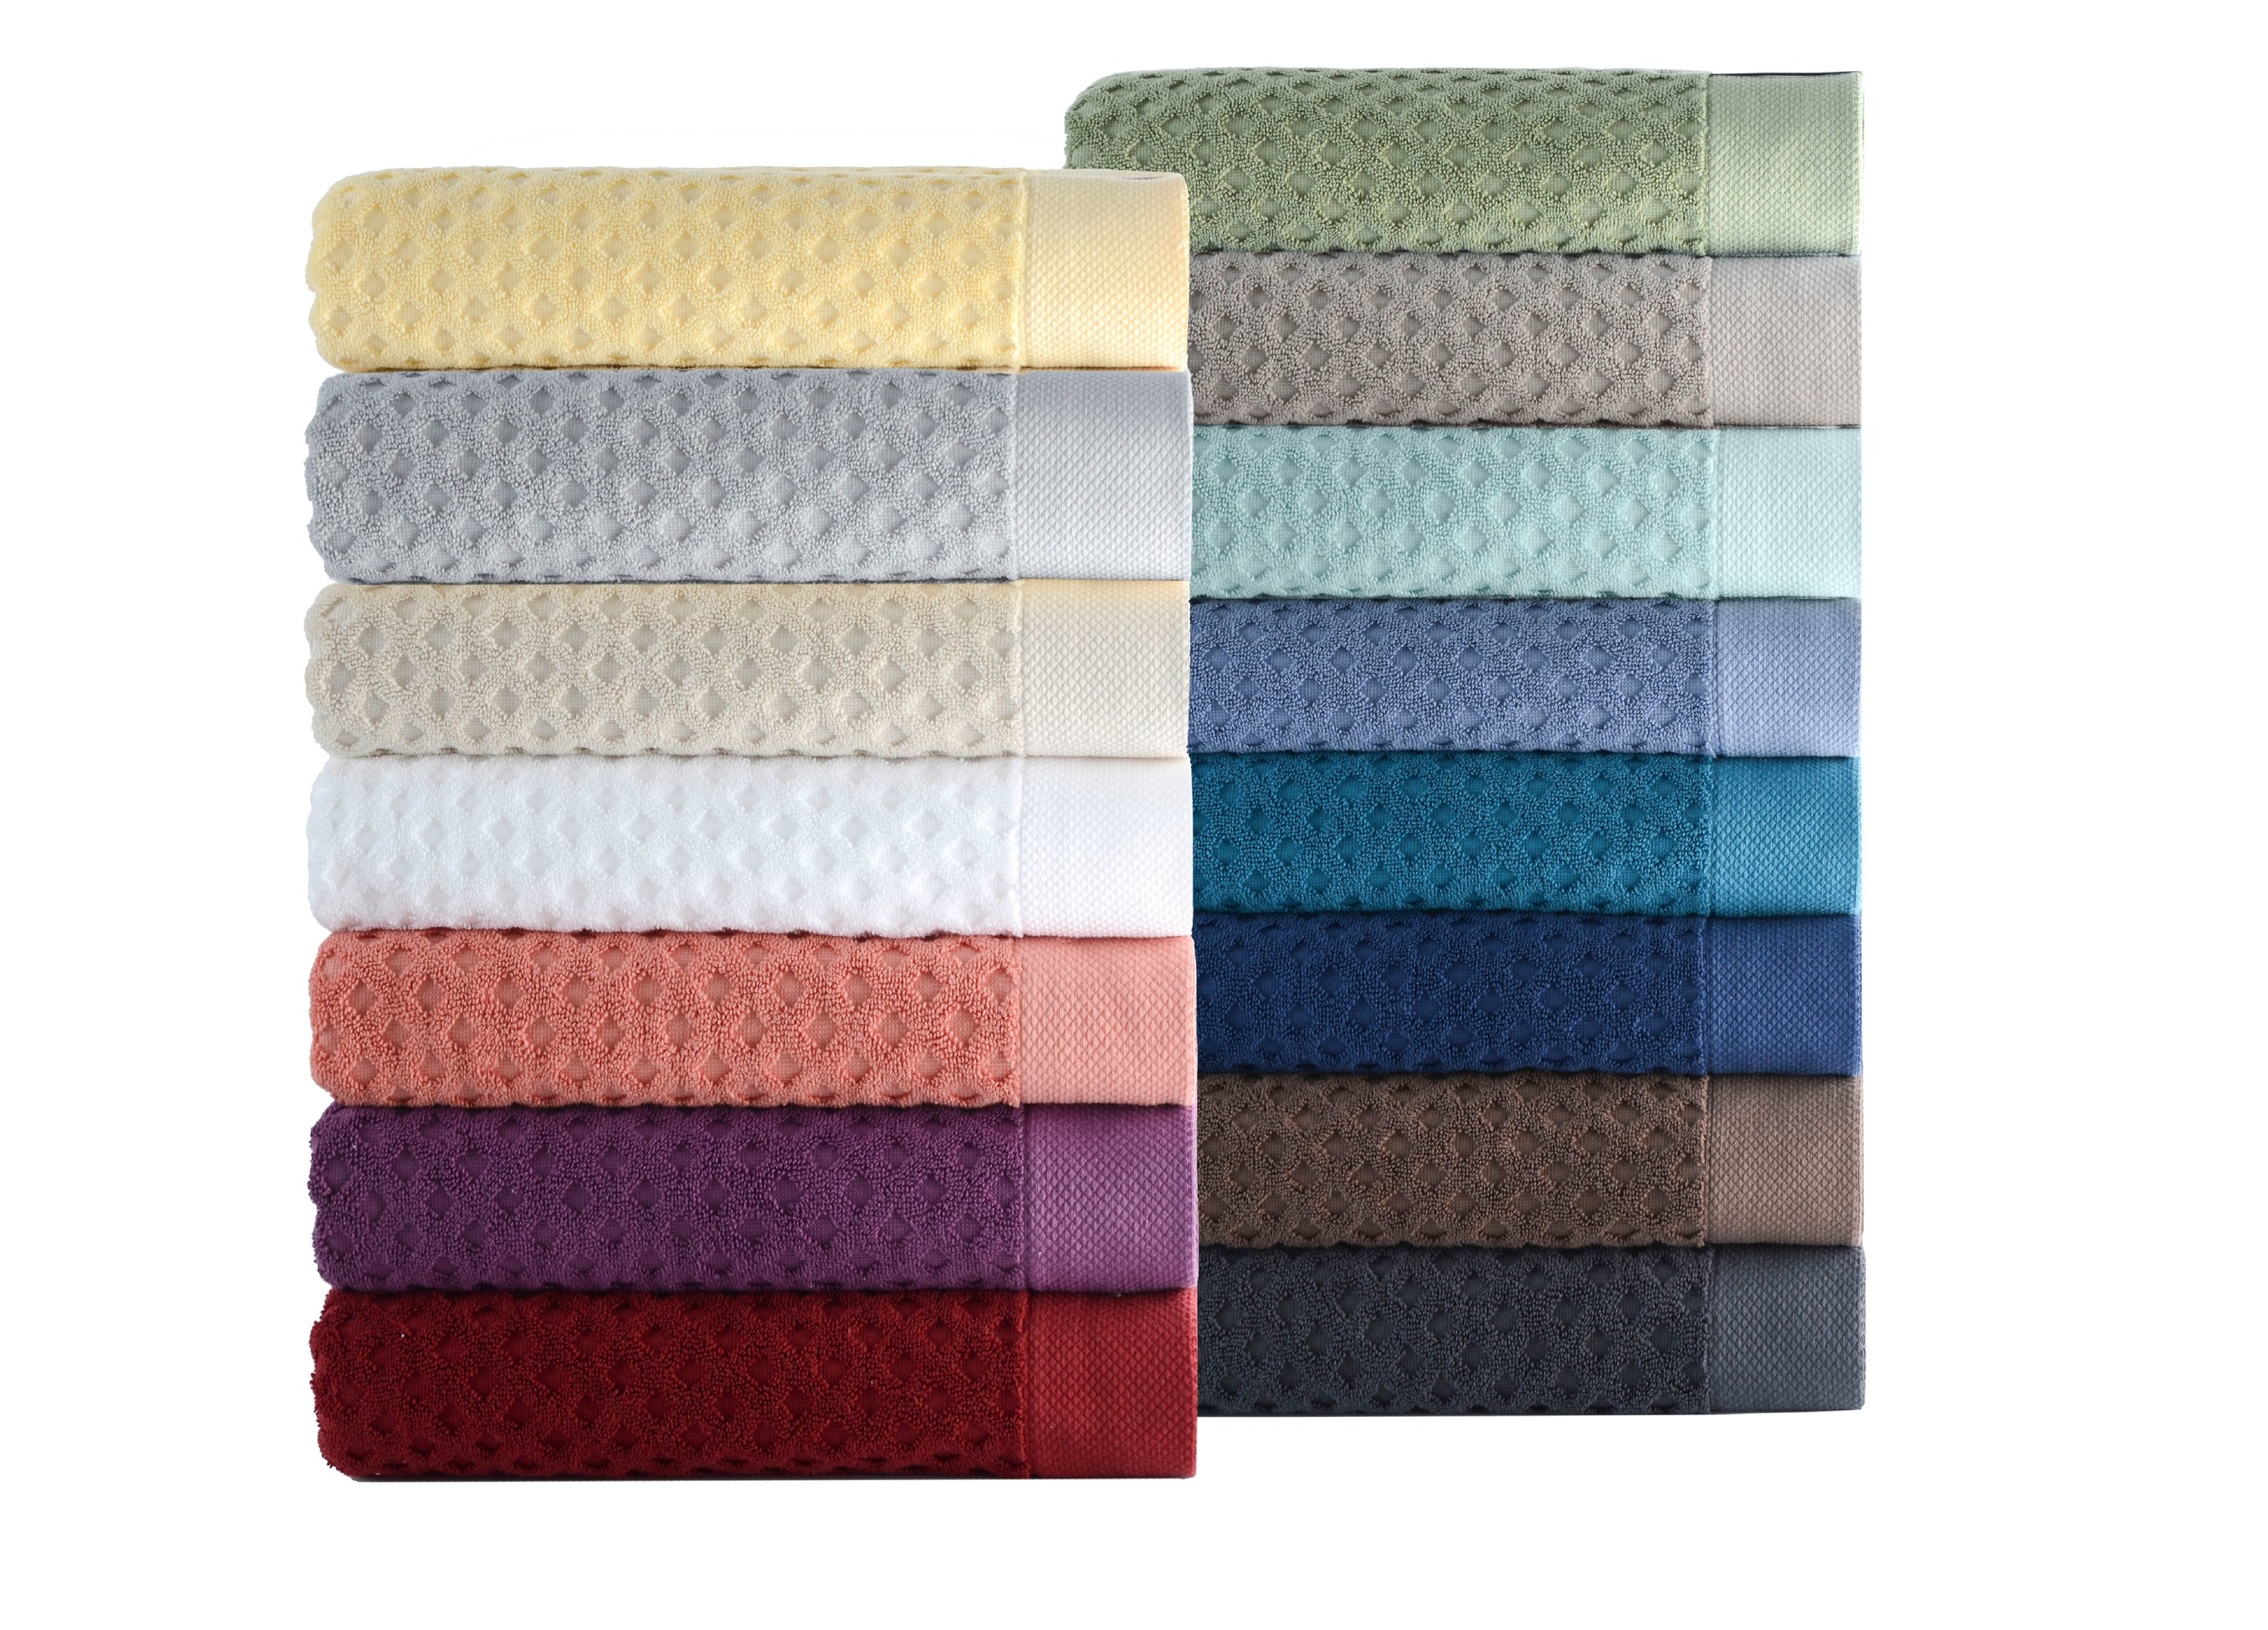 A rainbow of stacked bath towels